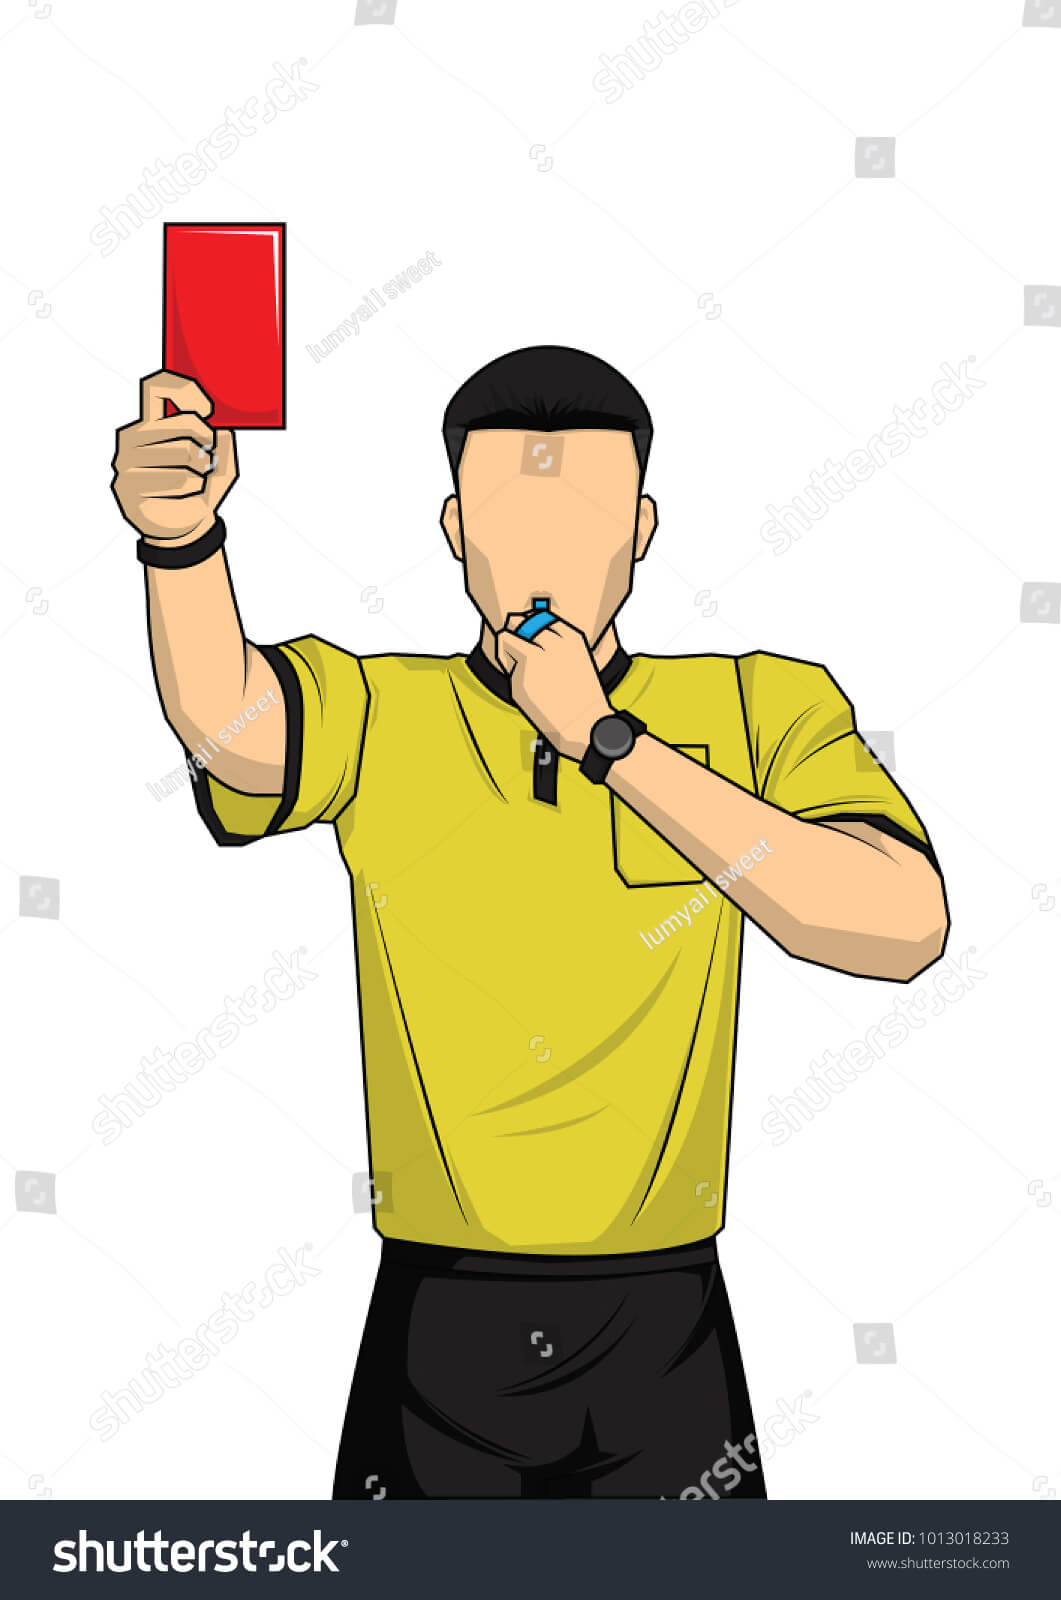 Soccer Referee Showing Red Card Referee Stock Vector Throughout Soccer Referee Game Card Template